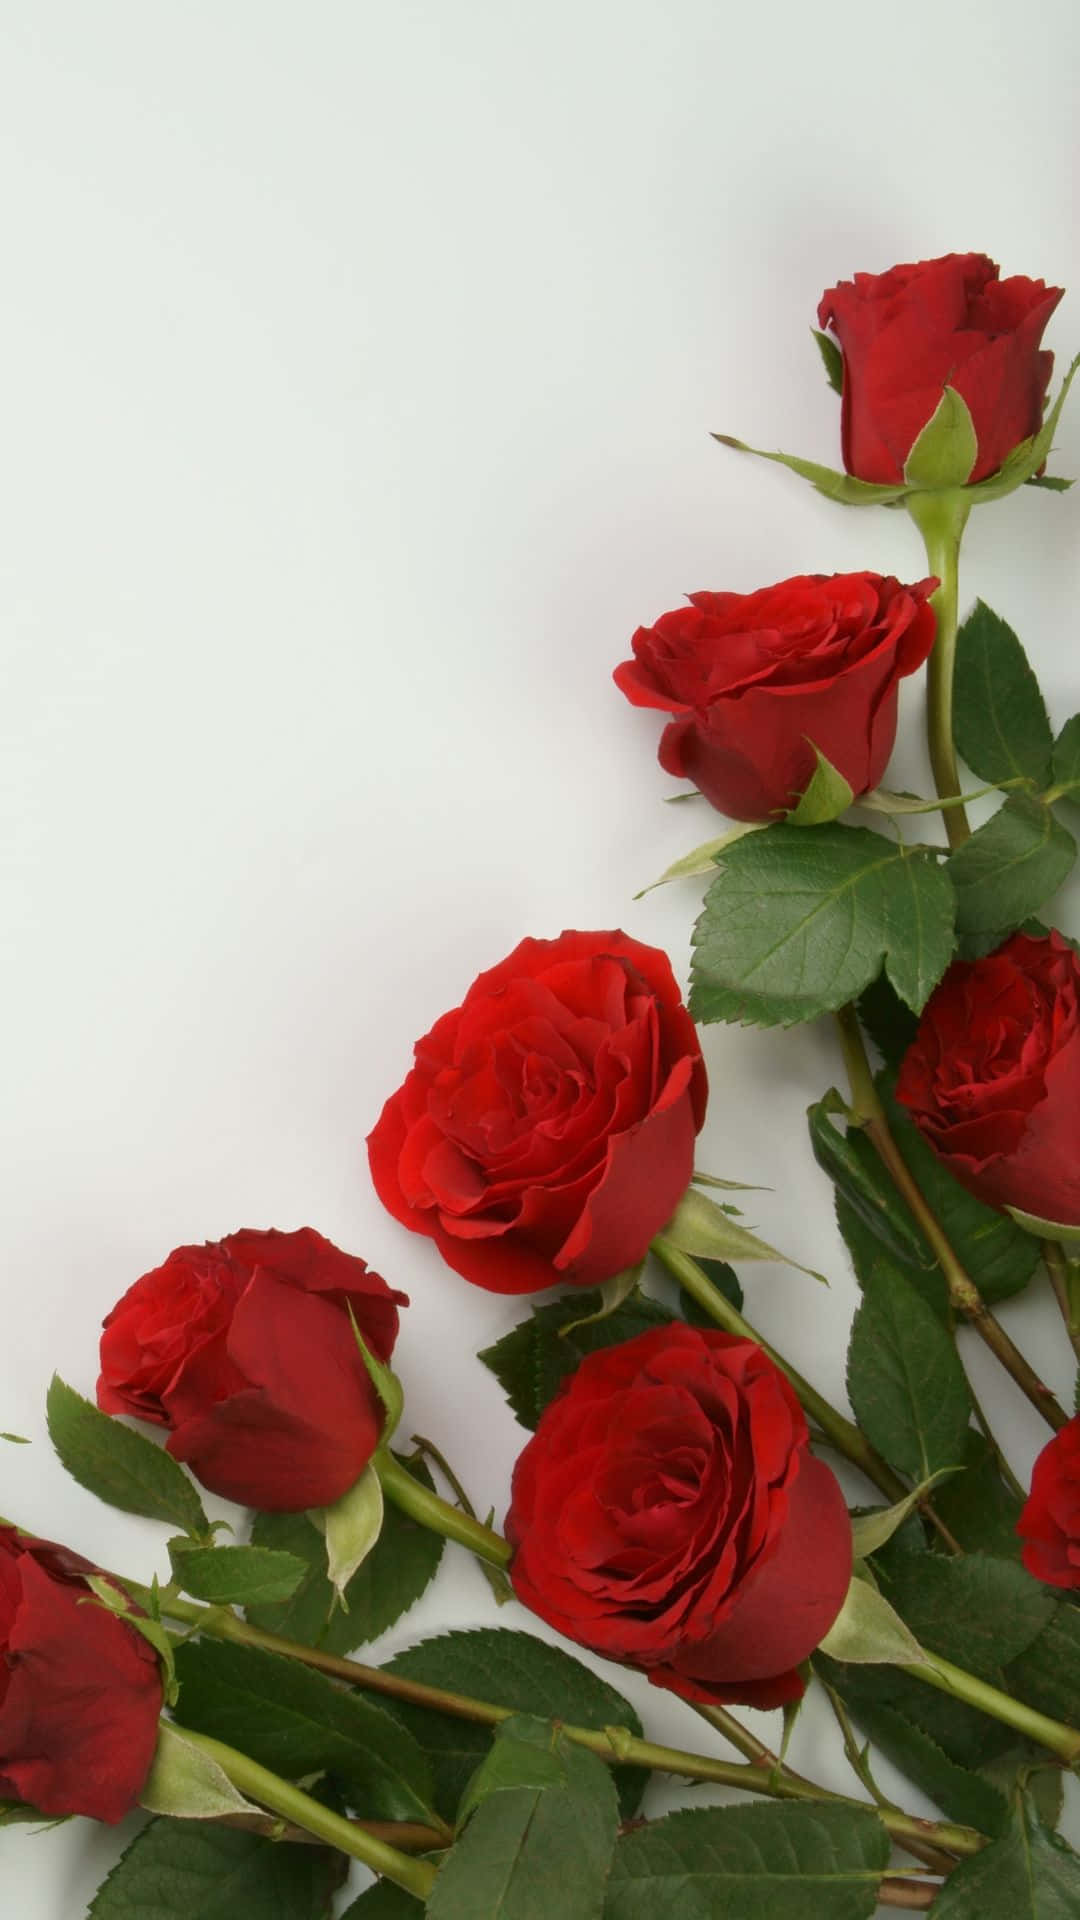 A Bunch Of Red Roses On A White Background Wallpaper